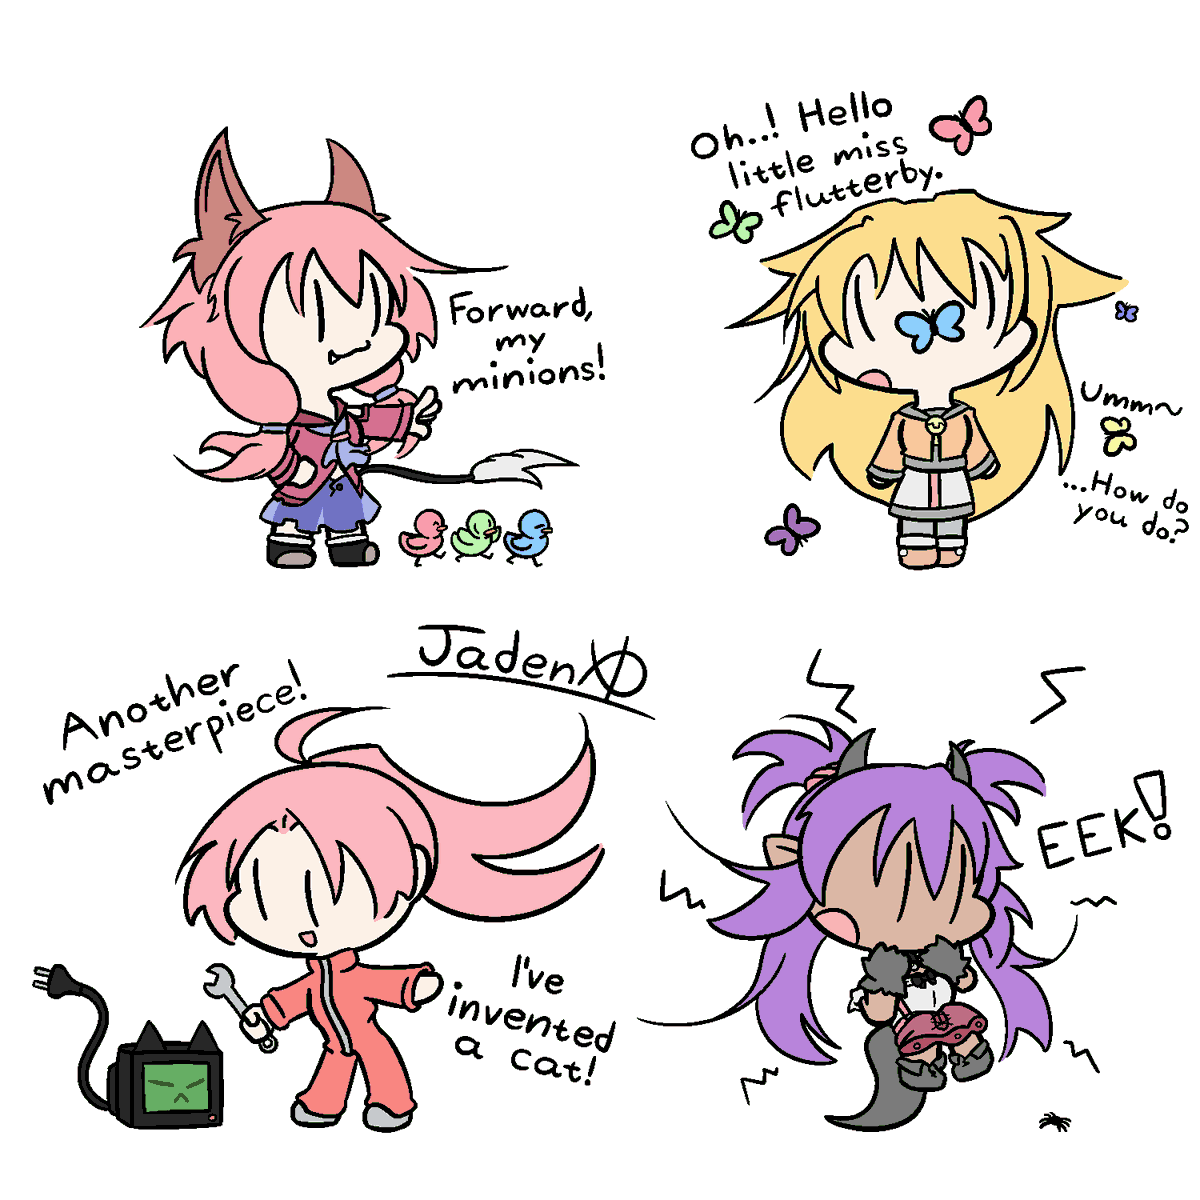 They can't be stopped
#100oj #100orange #100orangejuice